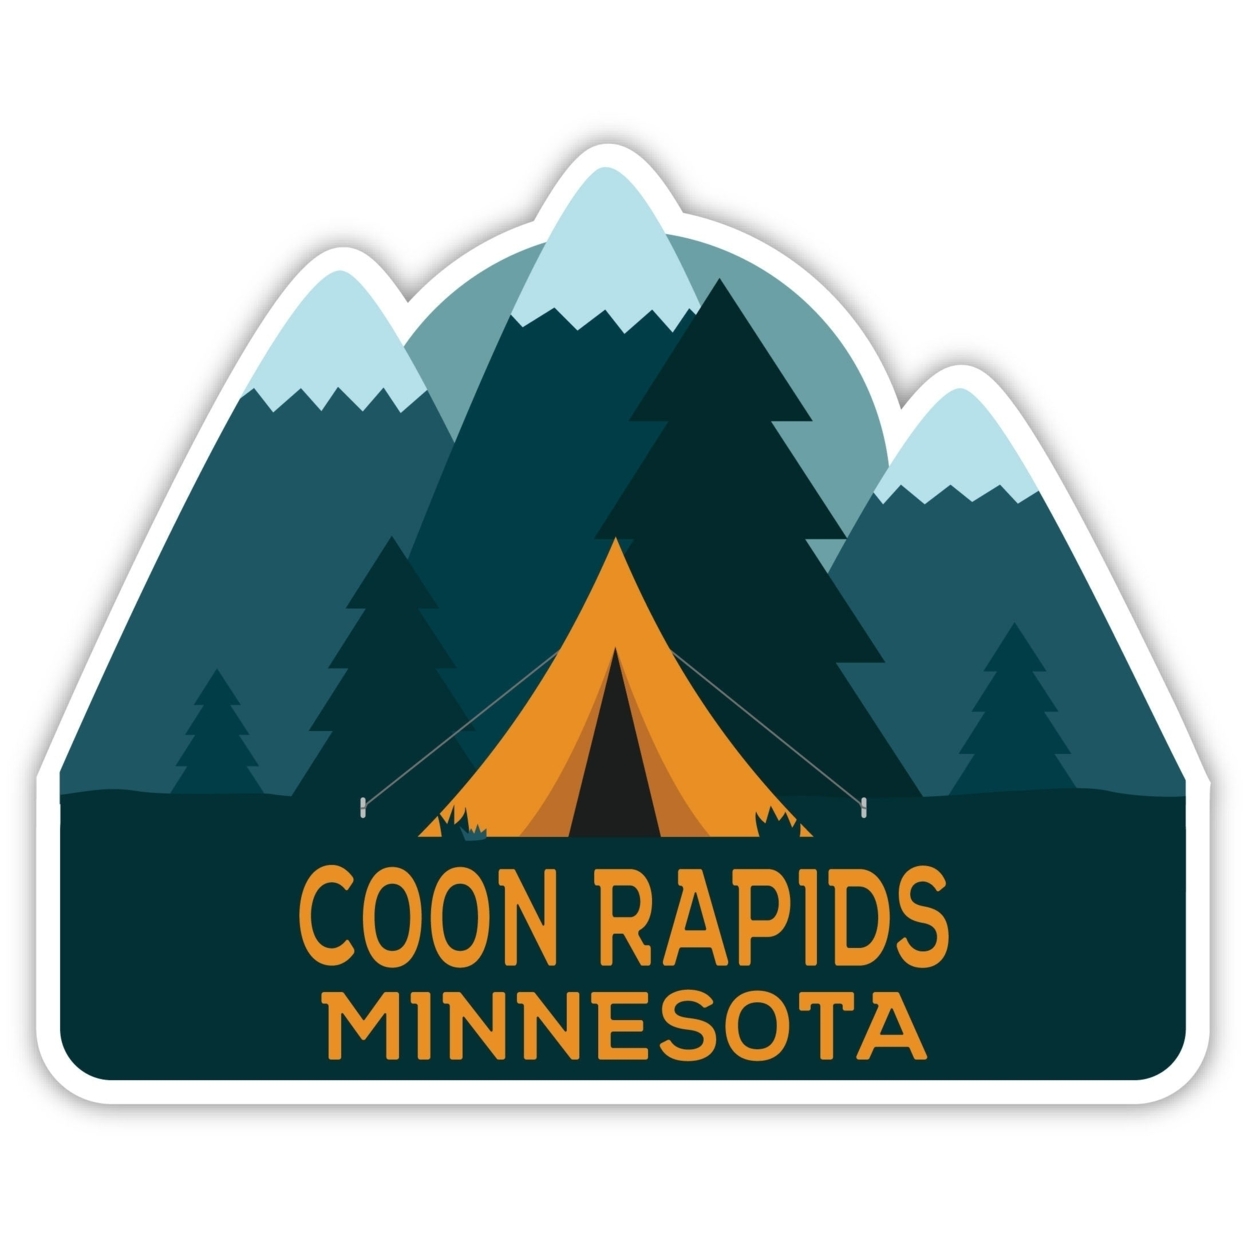 Coon Rapids Minnesota Souvenir Decorative Stickers (Choose Theme And Size) - 4-Pack, 10-Inch, Tent